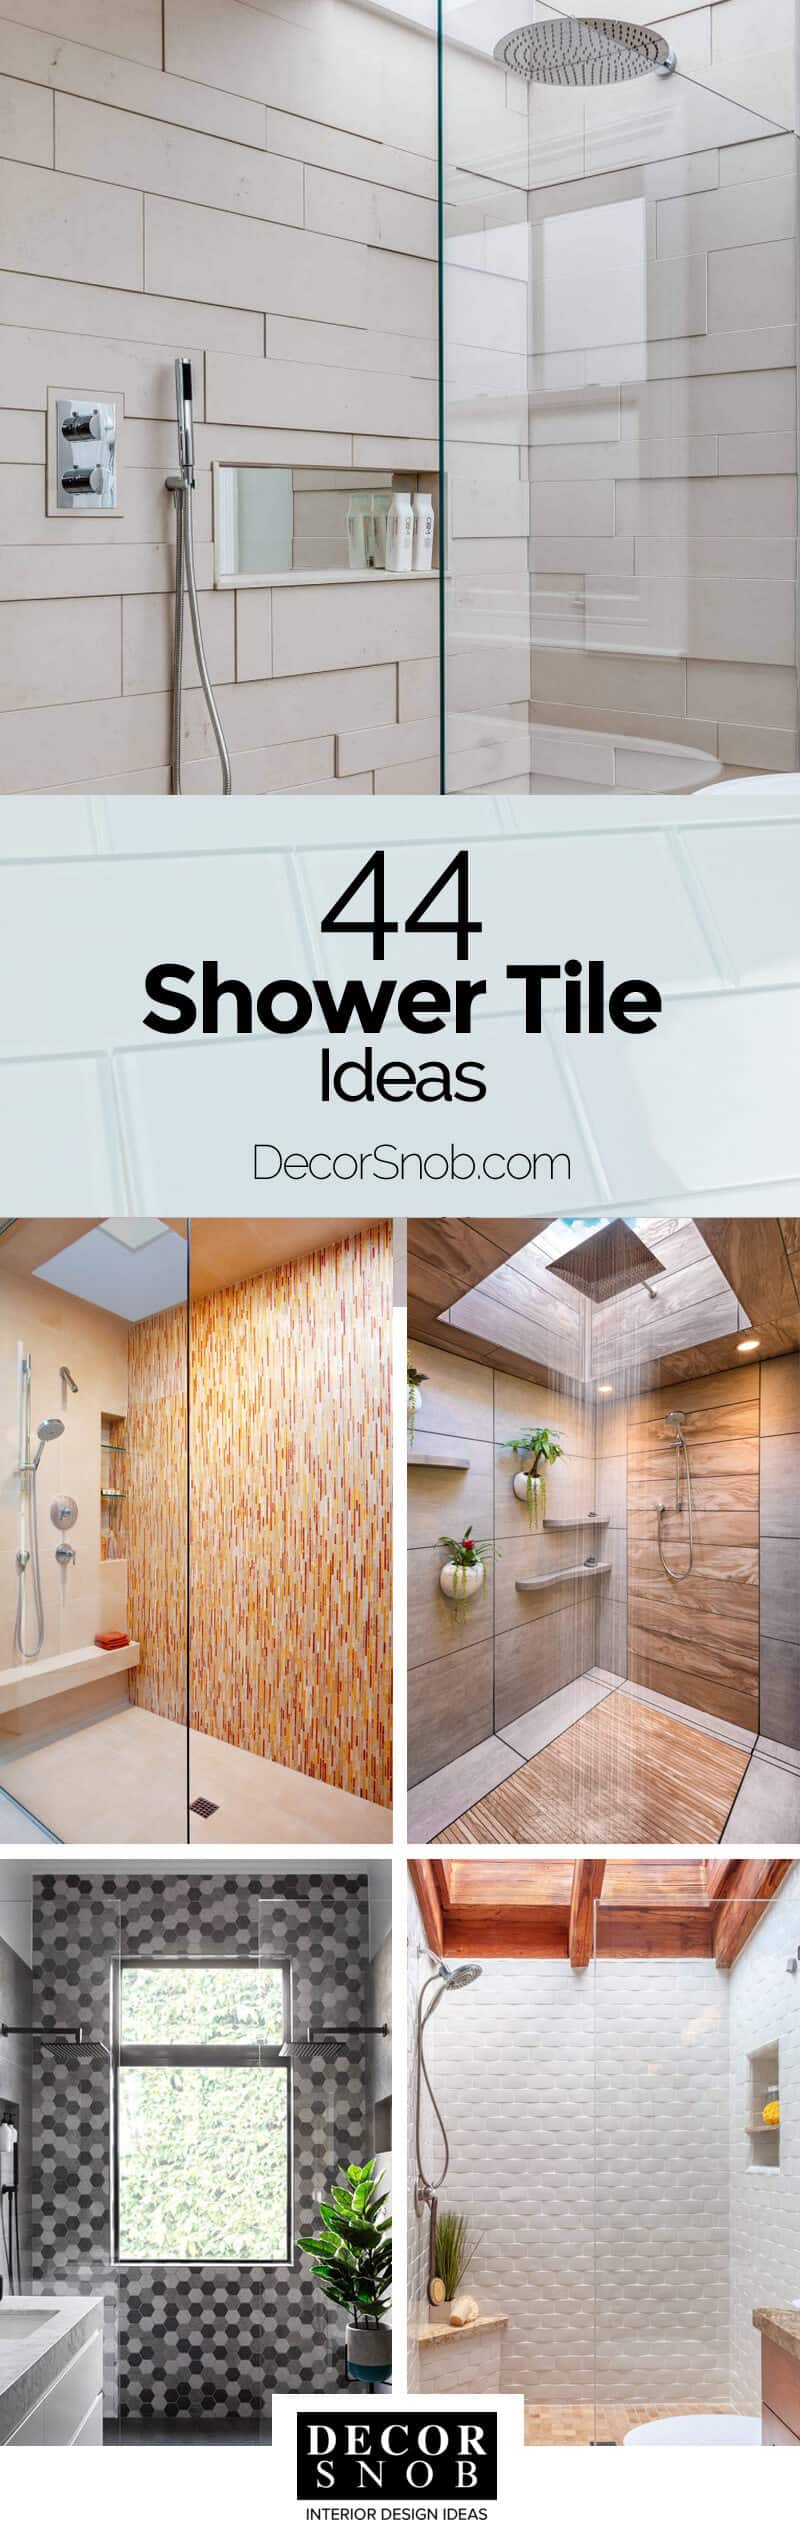 44 Modern Shower Tile Ideas And Designs 2021 Edition